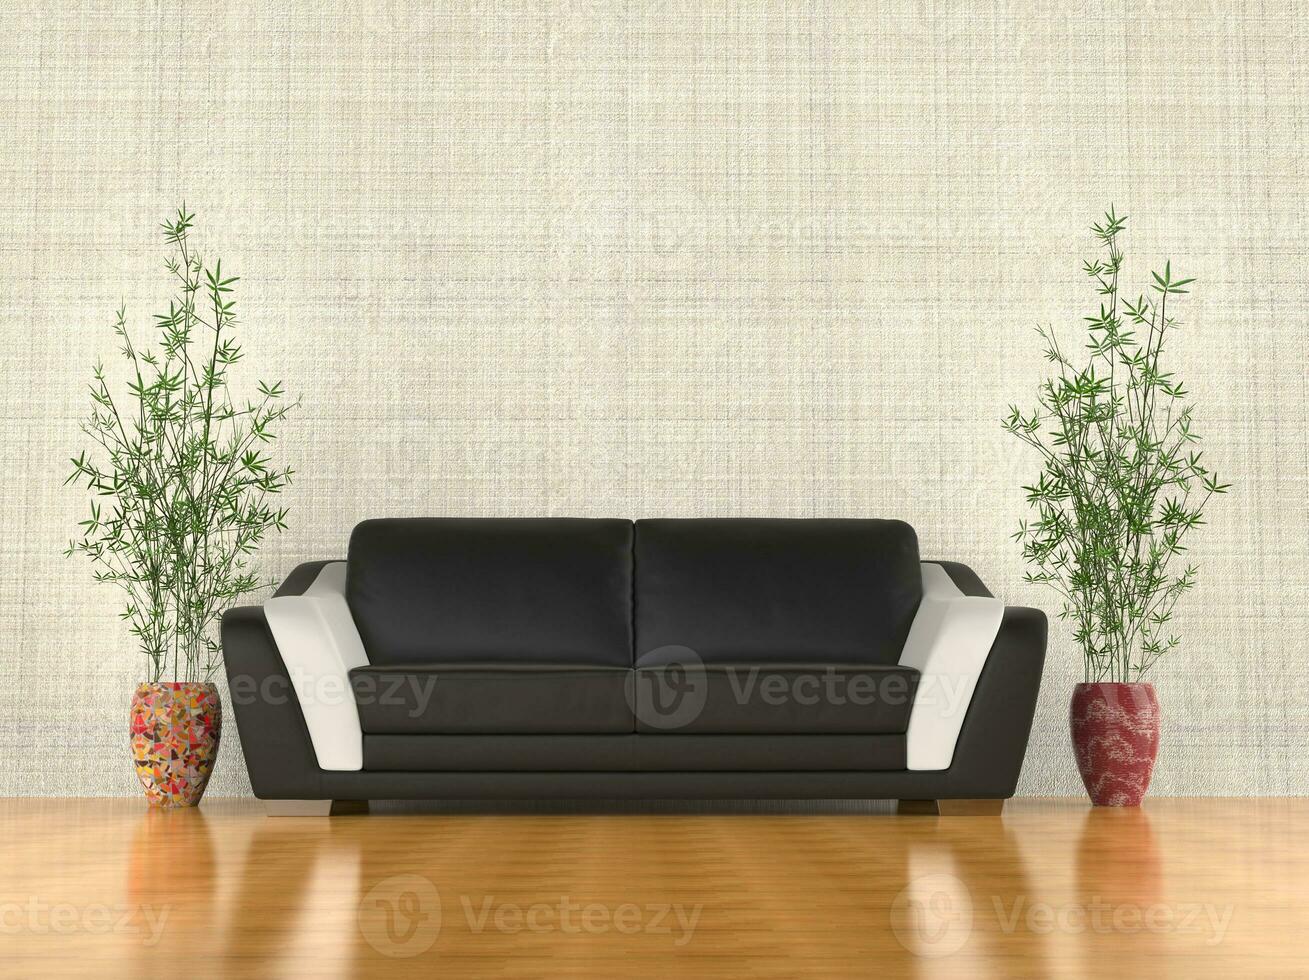 Modern sofa in the living room with two plants photo